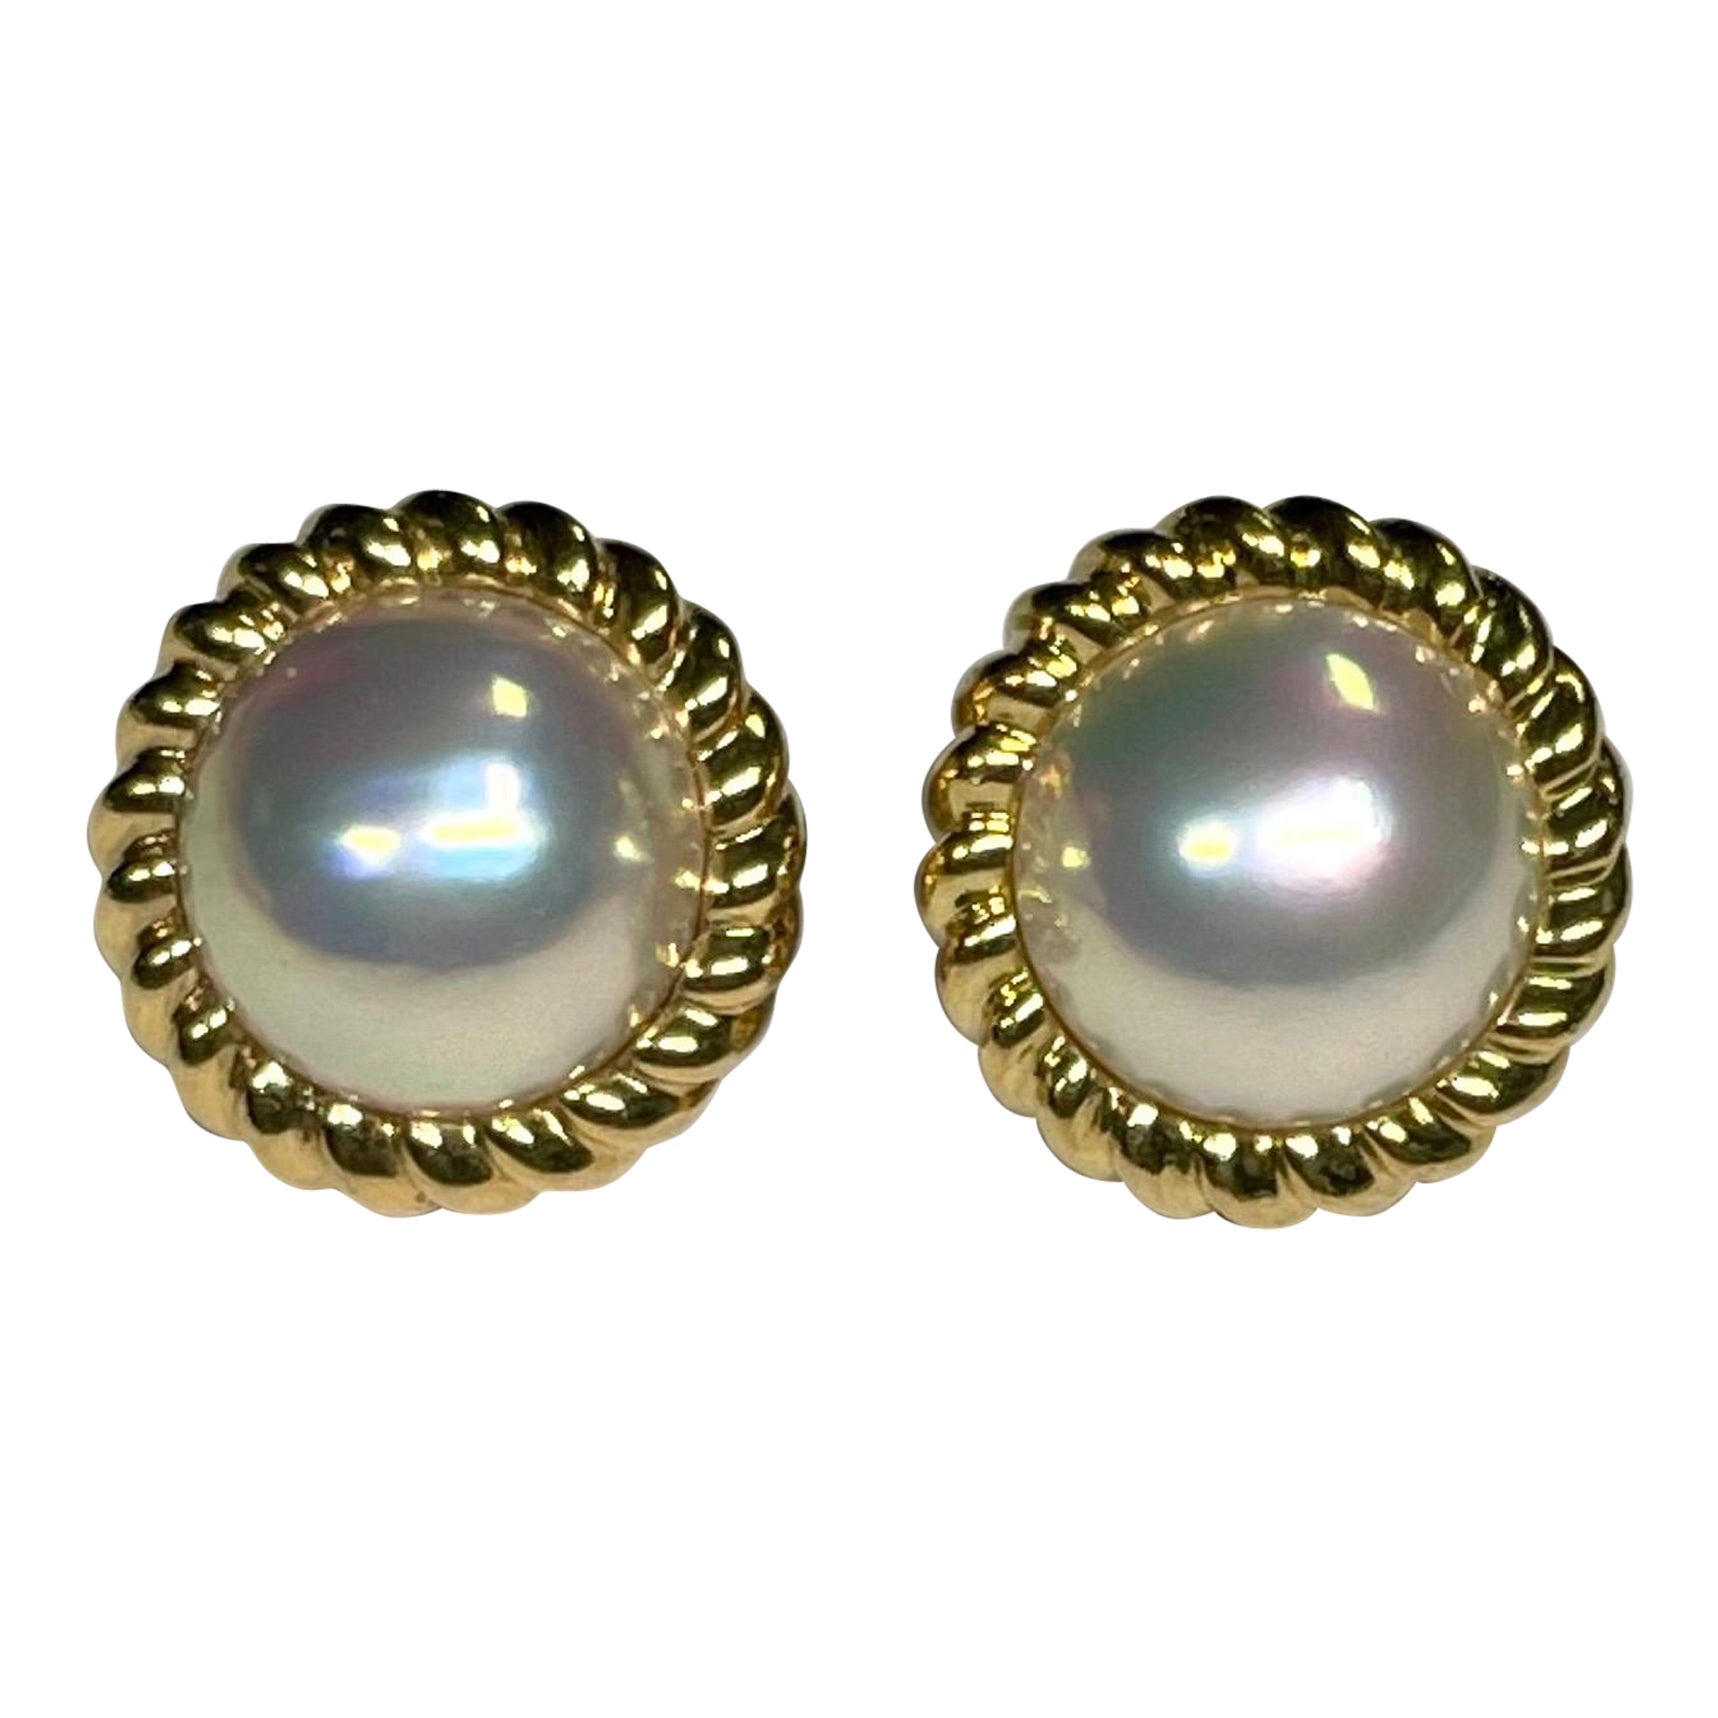 Discover more than 144 mabe pearl earrings south africa best - seven.edu.vn